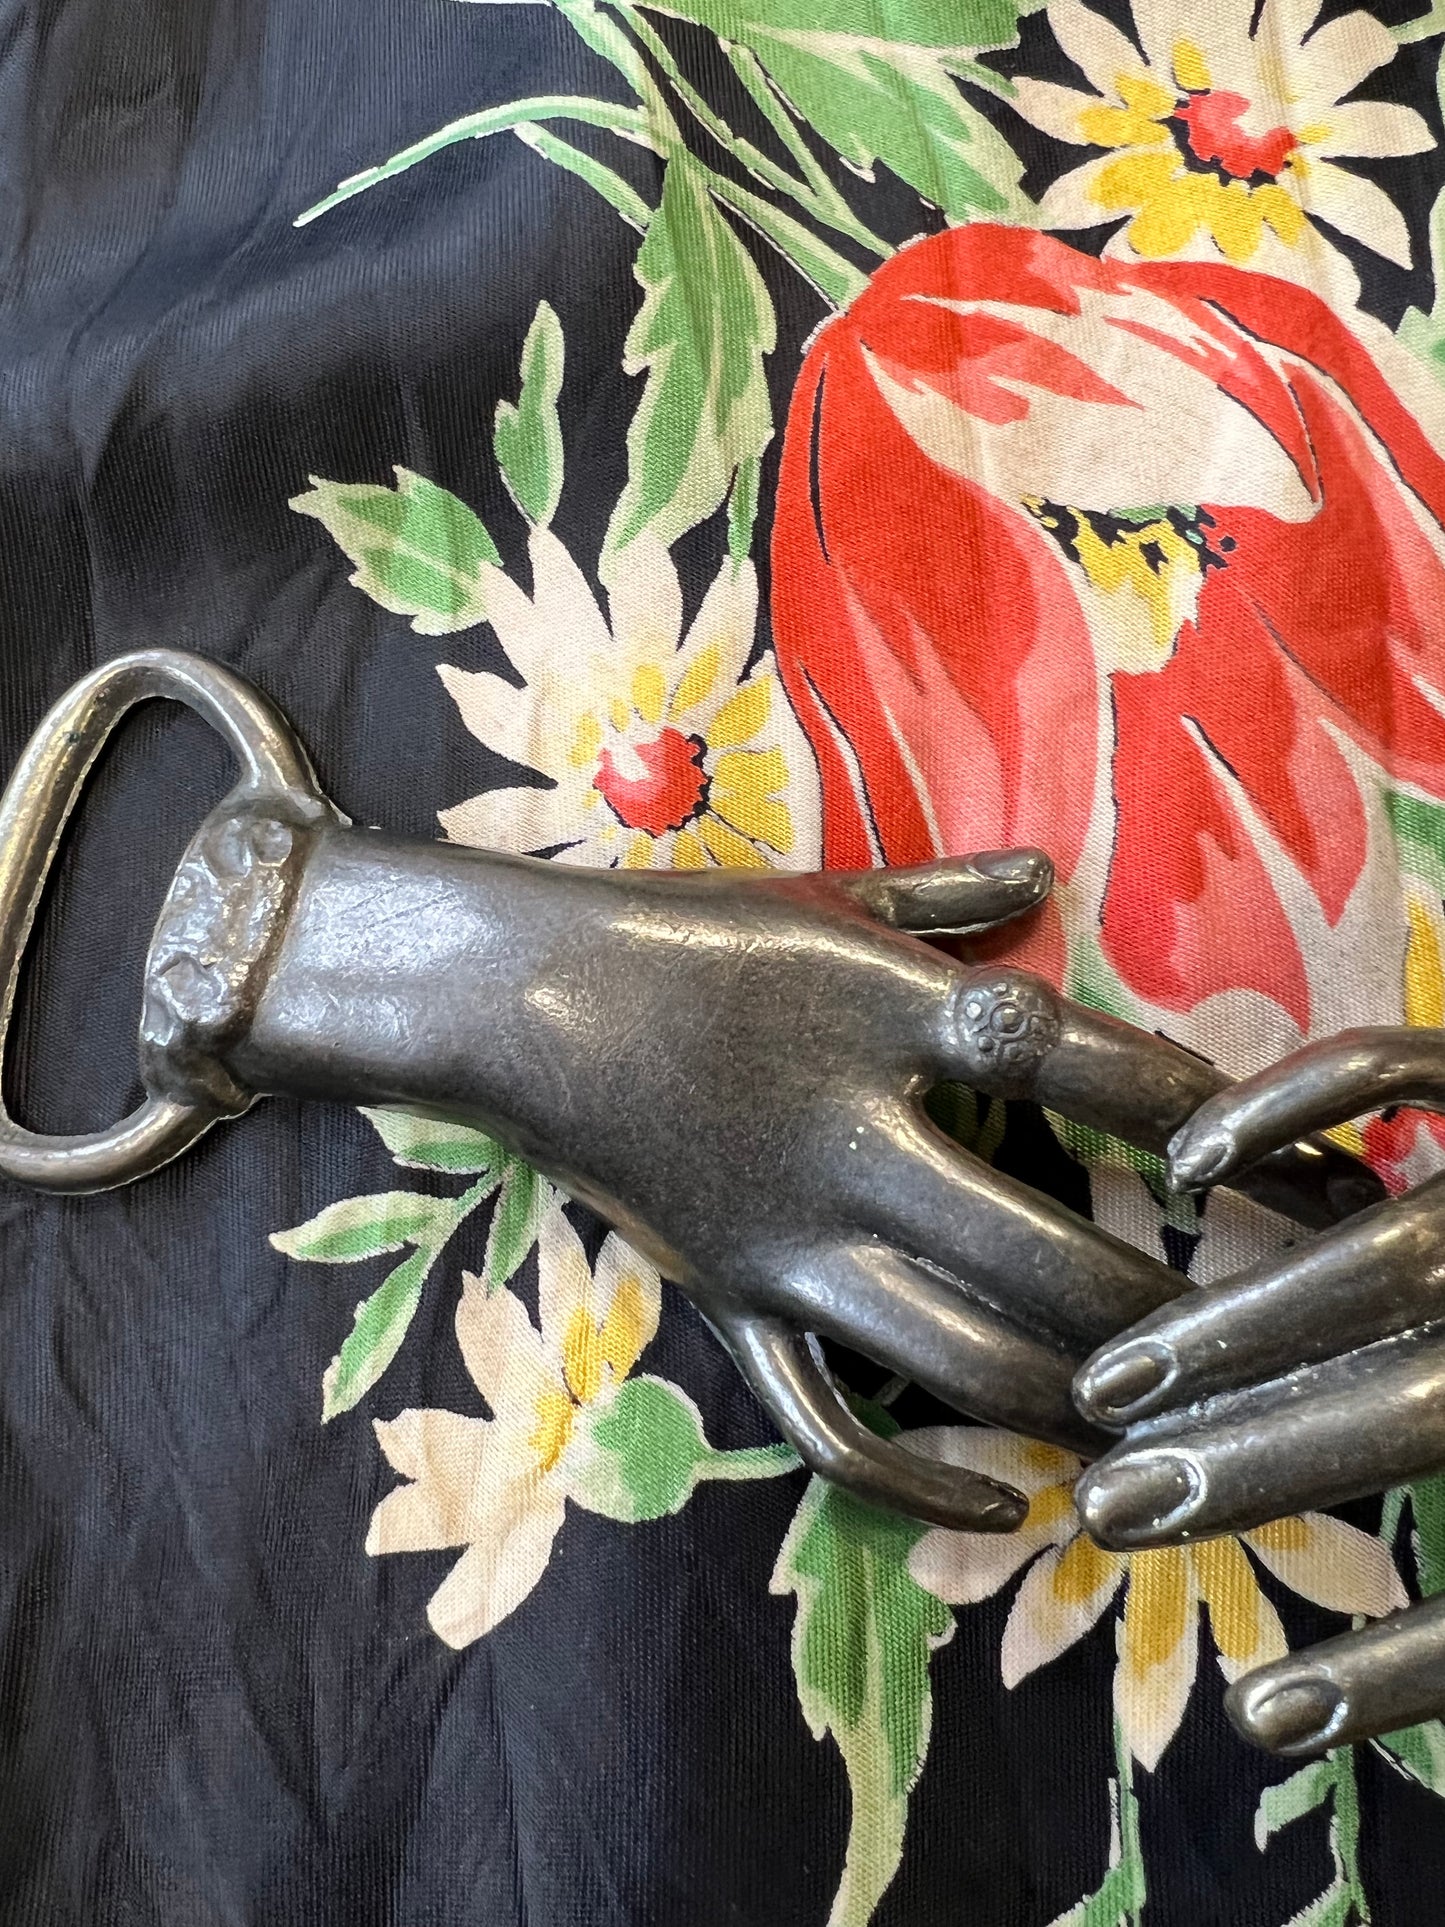 1970s Victorian Clasping Hands Belt Buckle